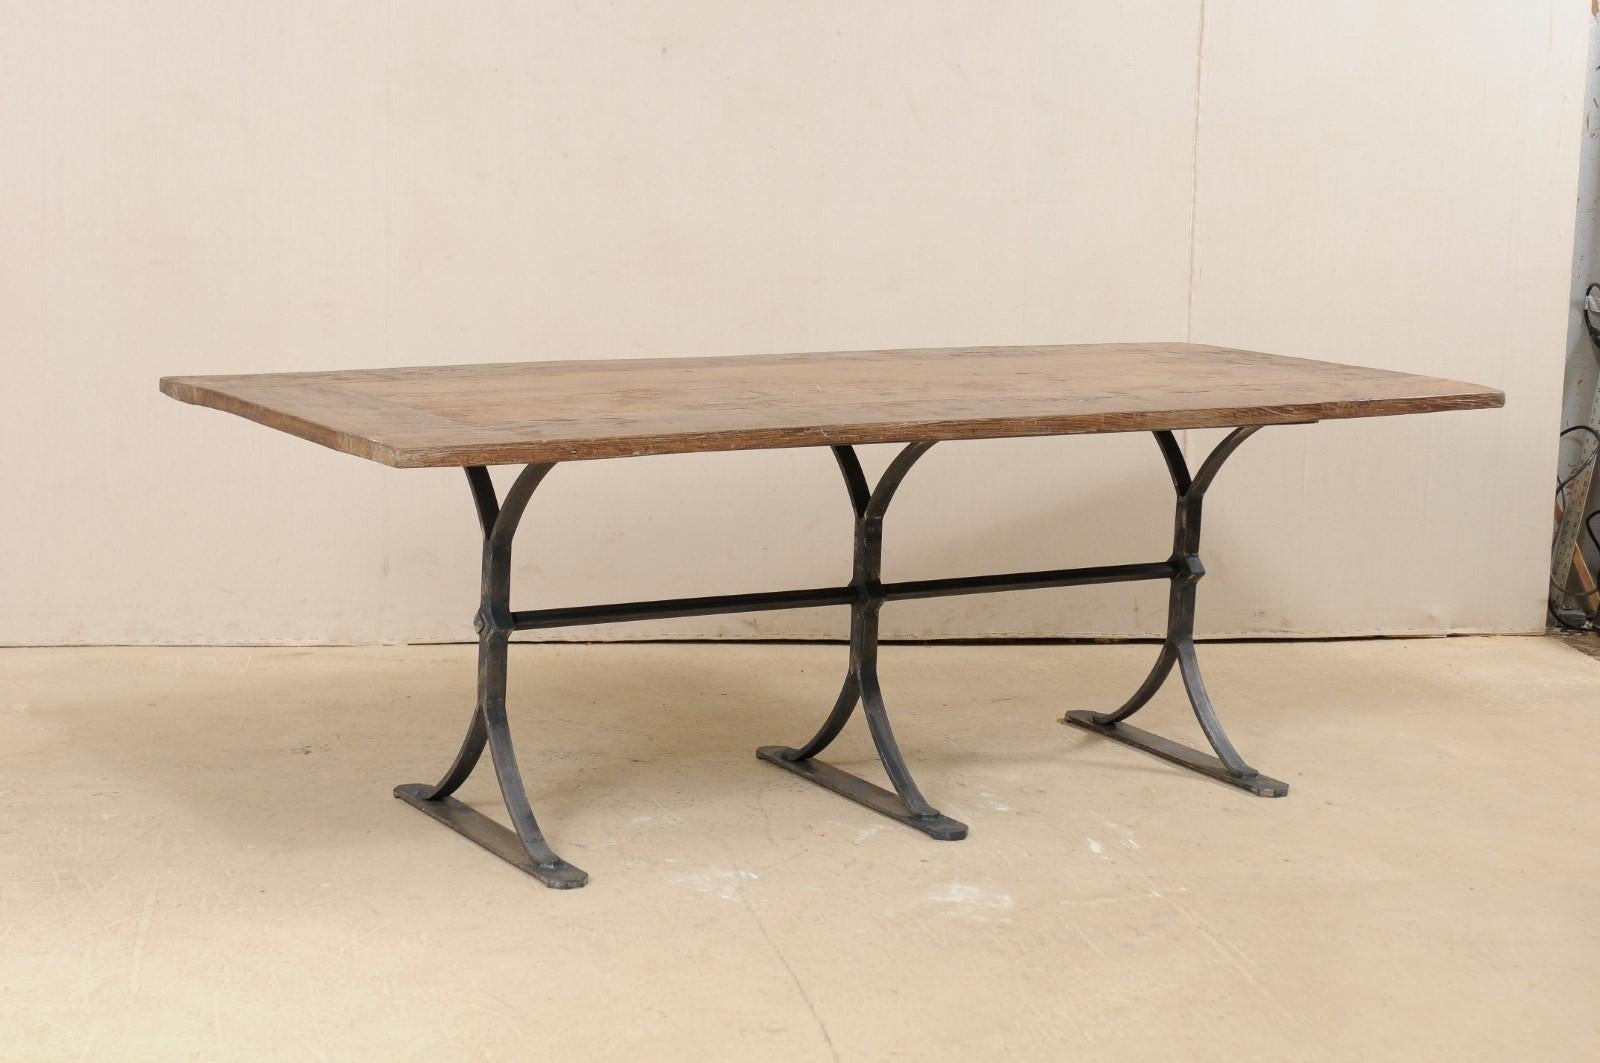 A Spanish table of old reclaimed wood with custom iron base. This 7.5 foot long dining table features a rectangular-shaped wood top, of old reclaimed oak and chestnut from Spain, resting upon a custom iron three-leg iron base. Both the wood, and